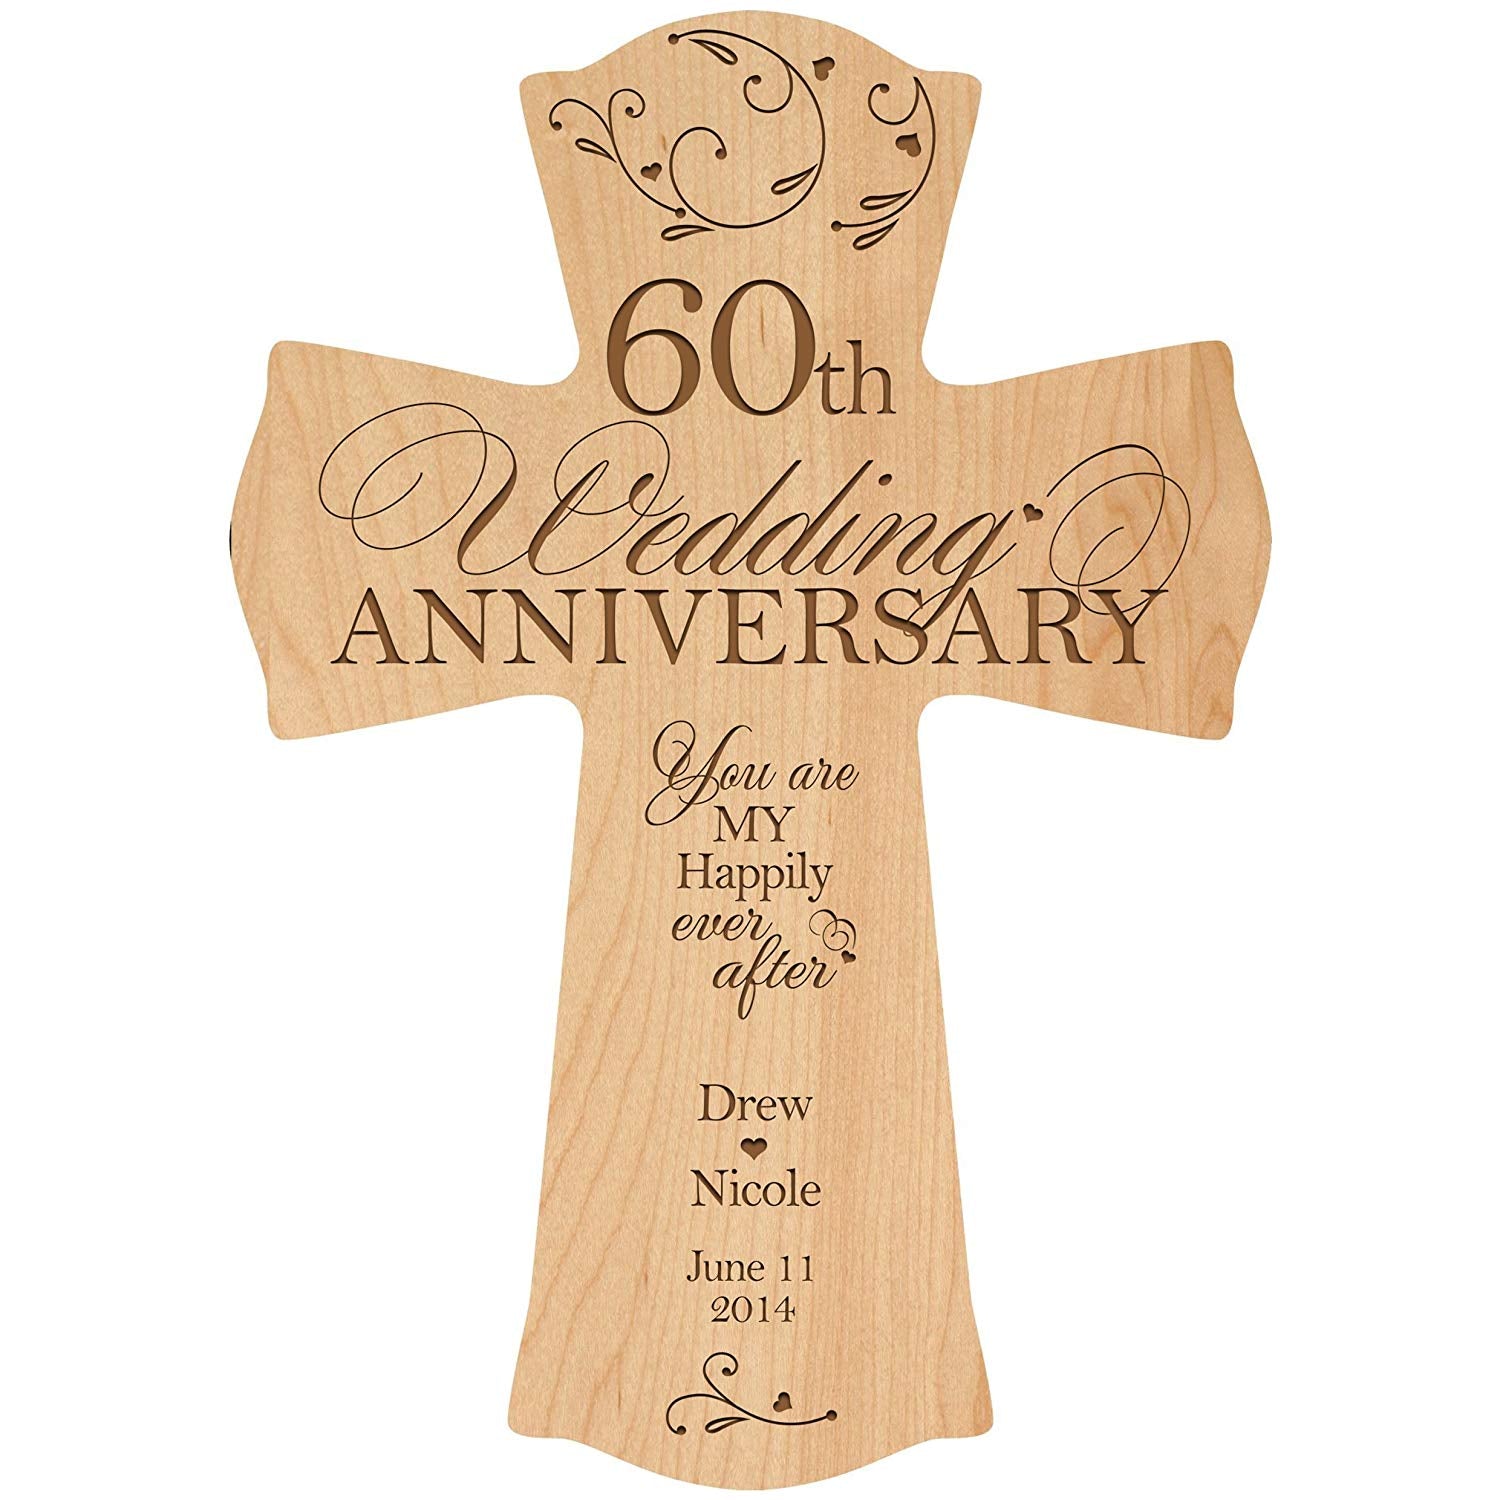 Celebrate 60 Years of Love with Unique Anniversary Gifts